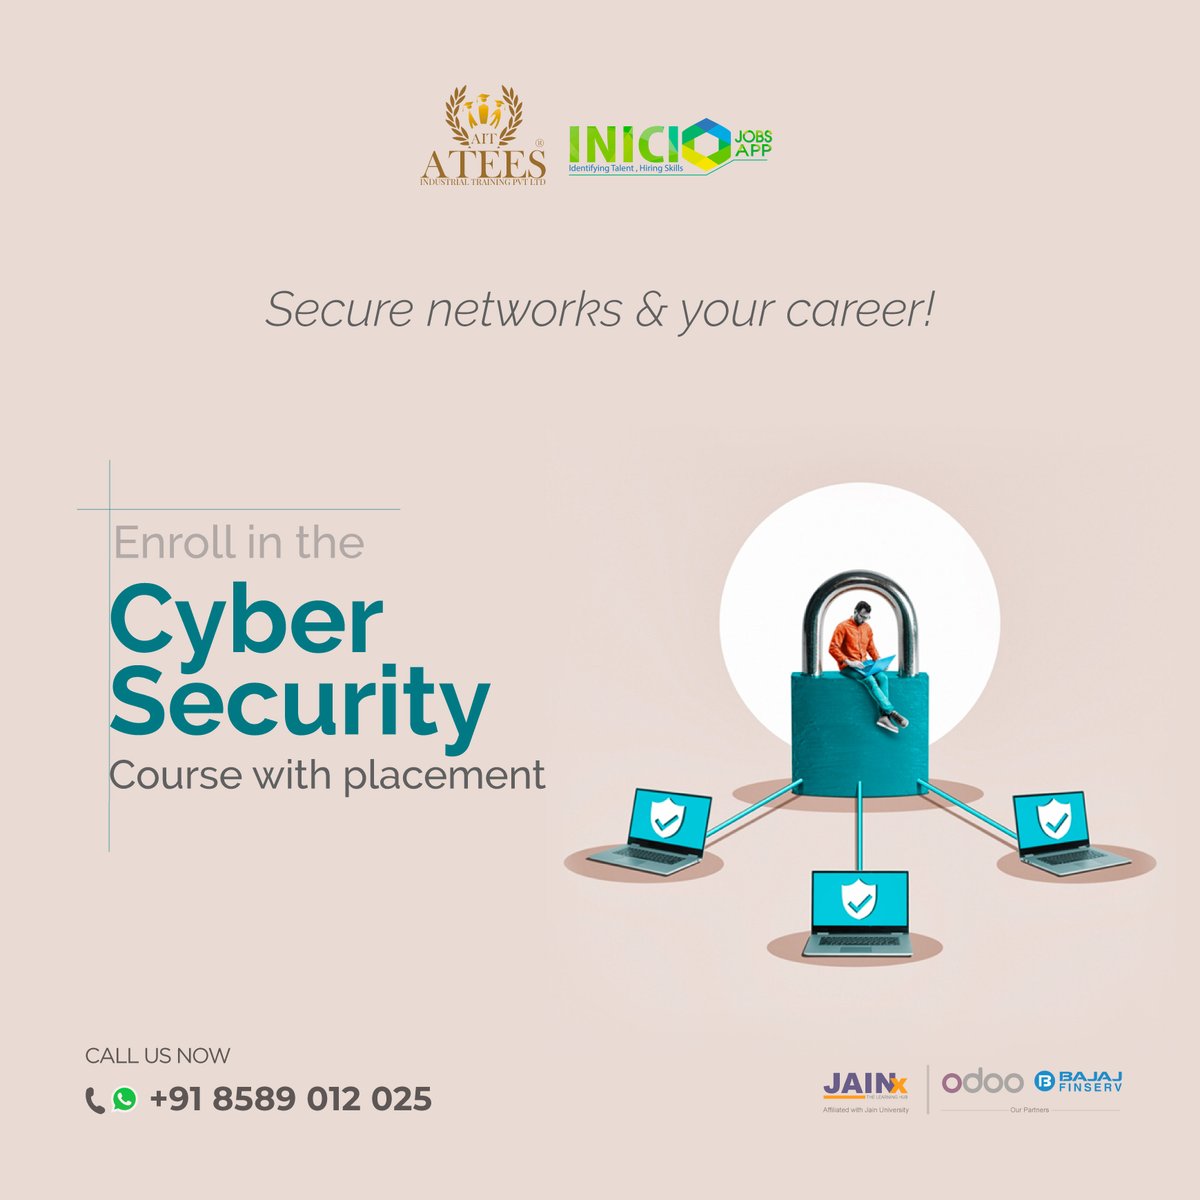 Boost your Cyber Security skills with a comprehensive course!

Join our exclusive Cyber Security Course and arm yourself with the knowledge and skills needed to navigate the complex world of cyber security.

#CyberSecurityCourse #InfoSecTraining #OnlineSecurity #ITSecurity